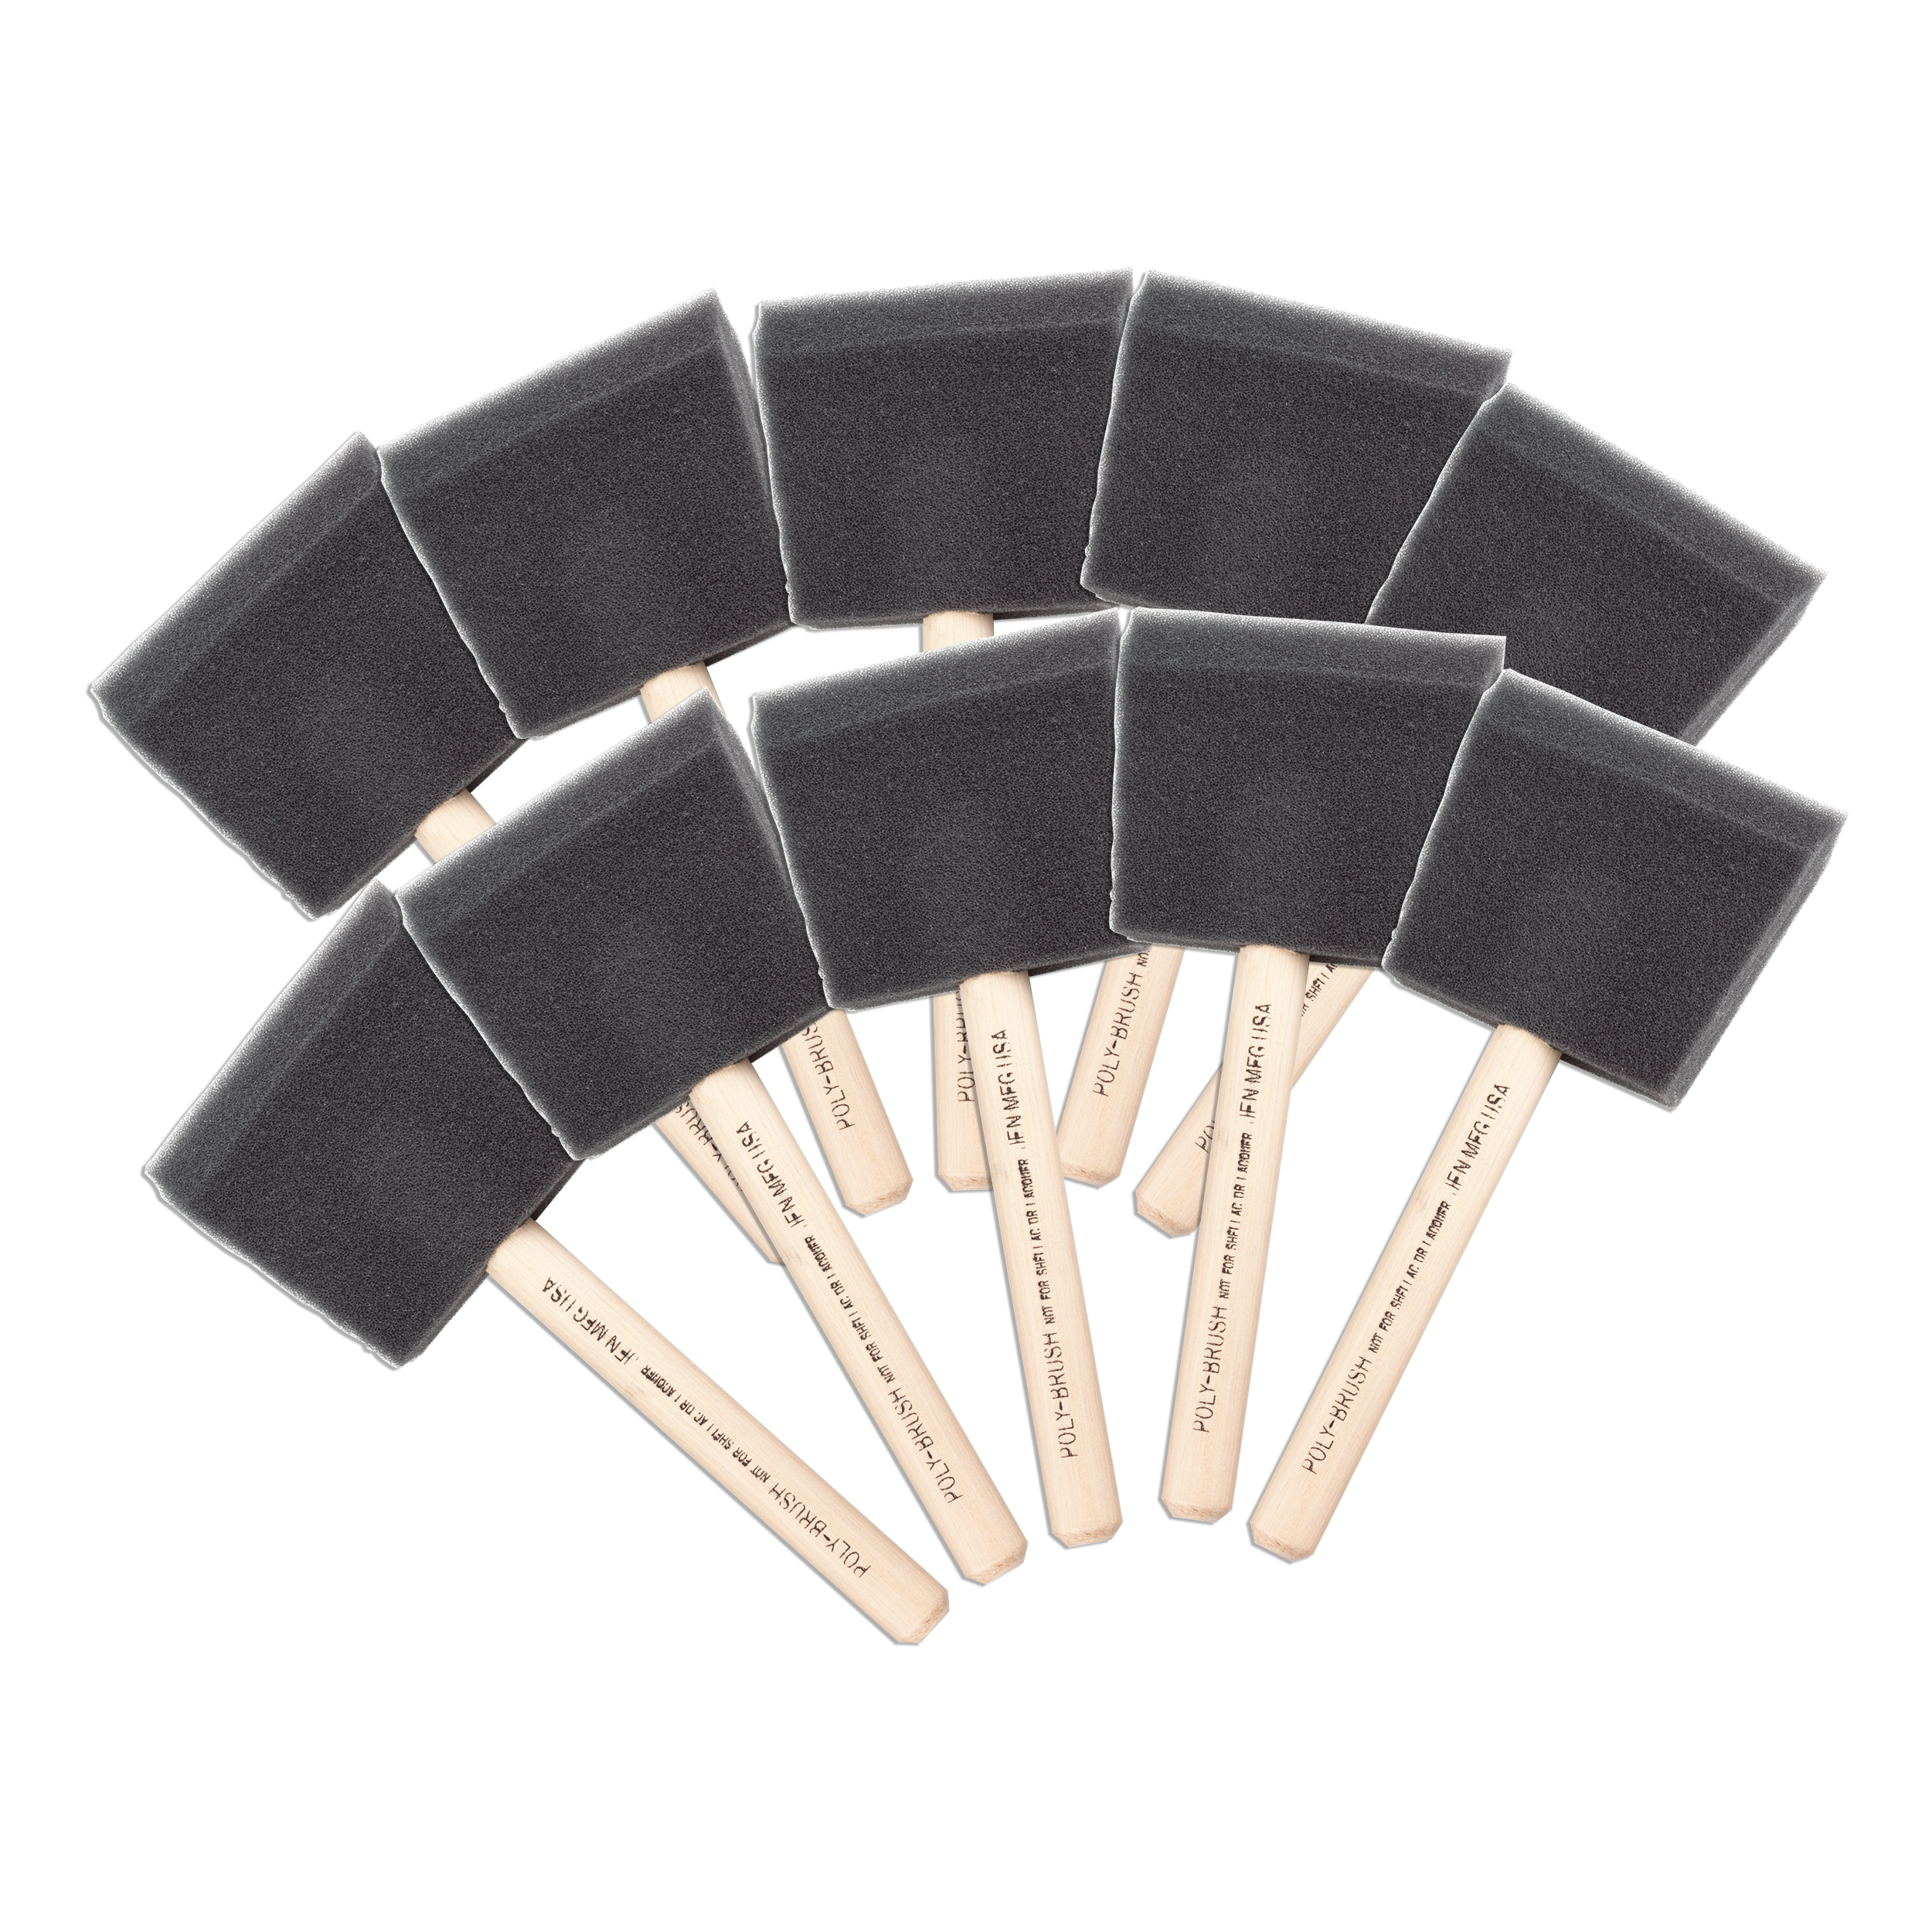 3" Wooden Handle Foam Brushes, 10-pack